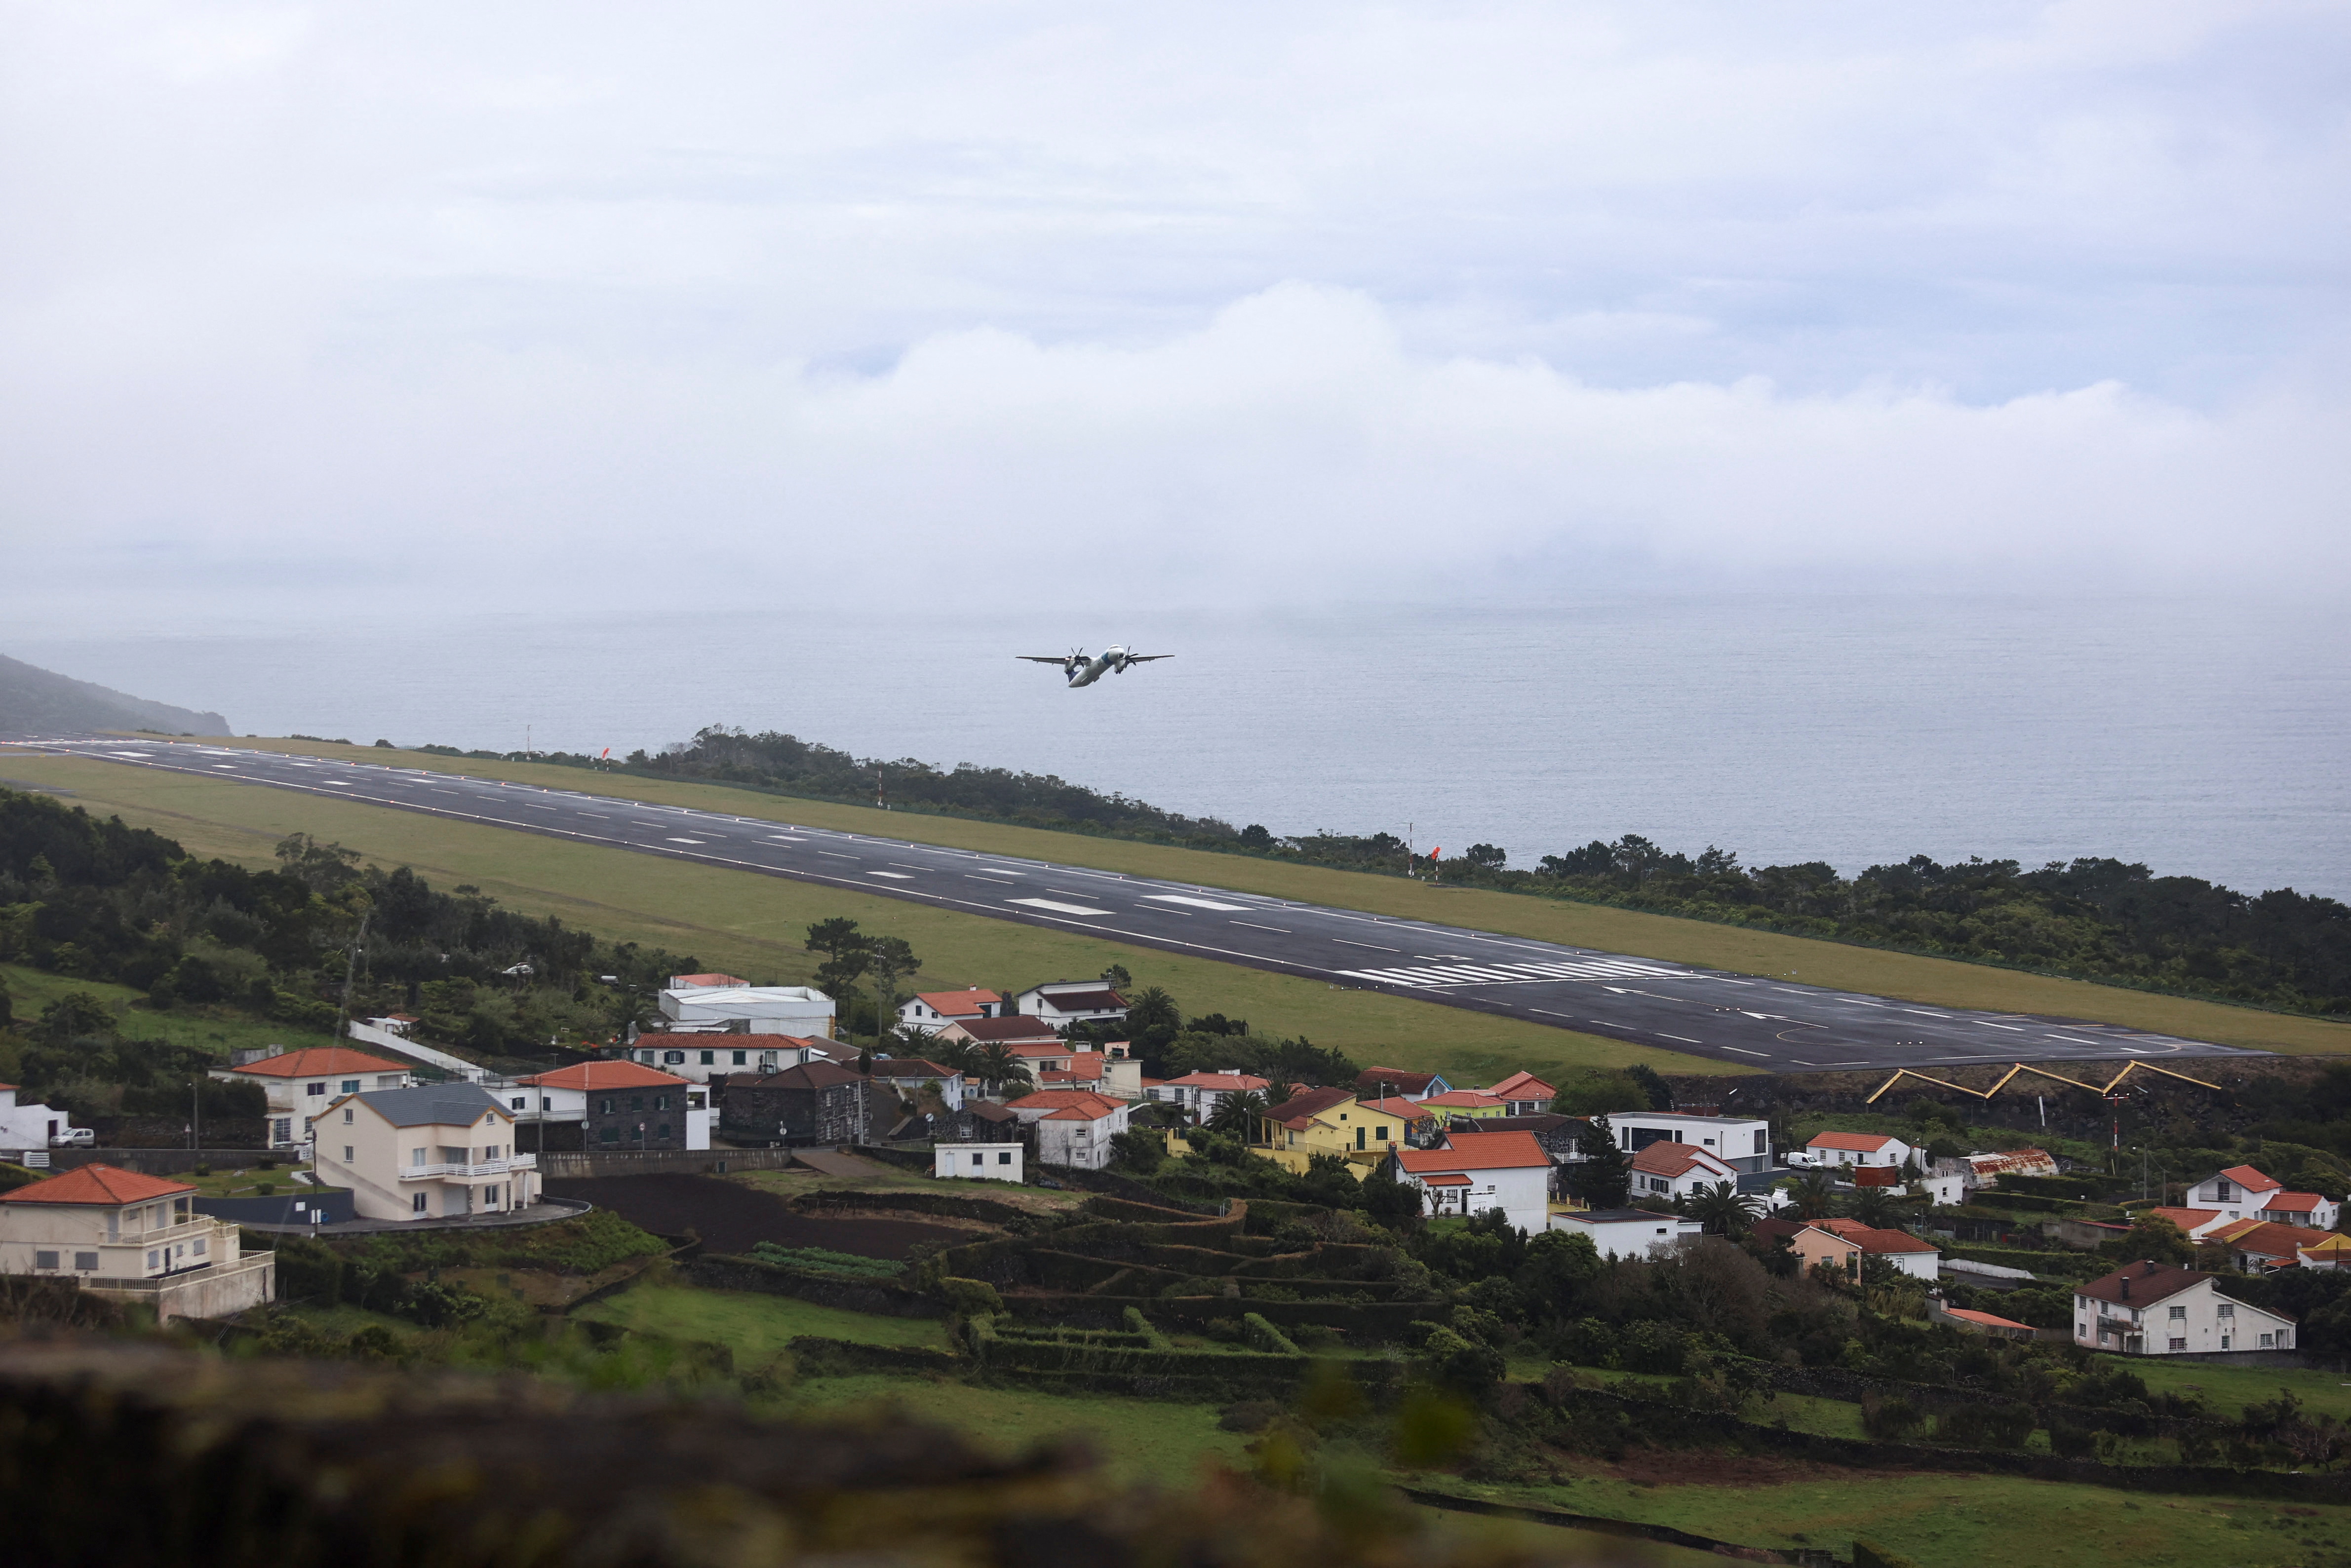 Last commercial flight of the day takes off from Sao Jorge island, Azores